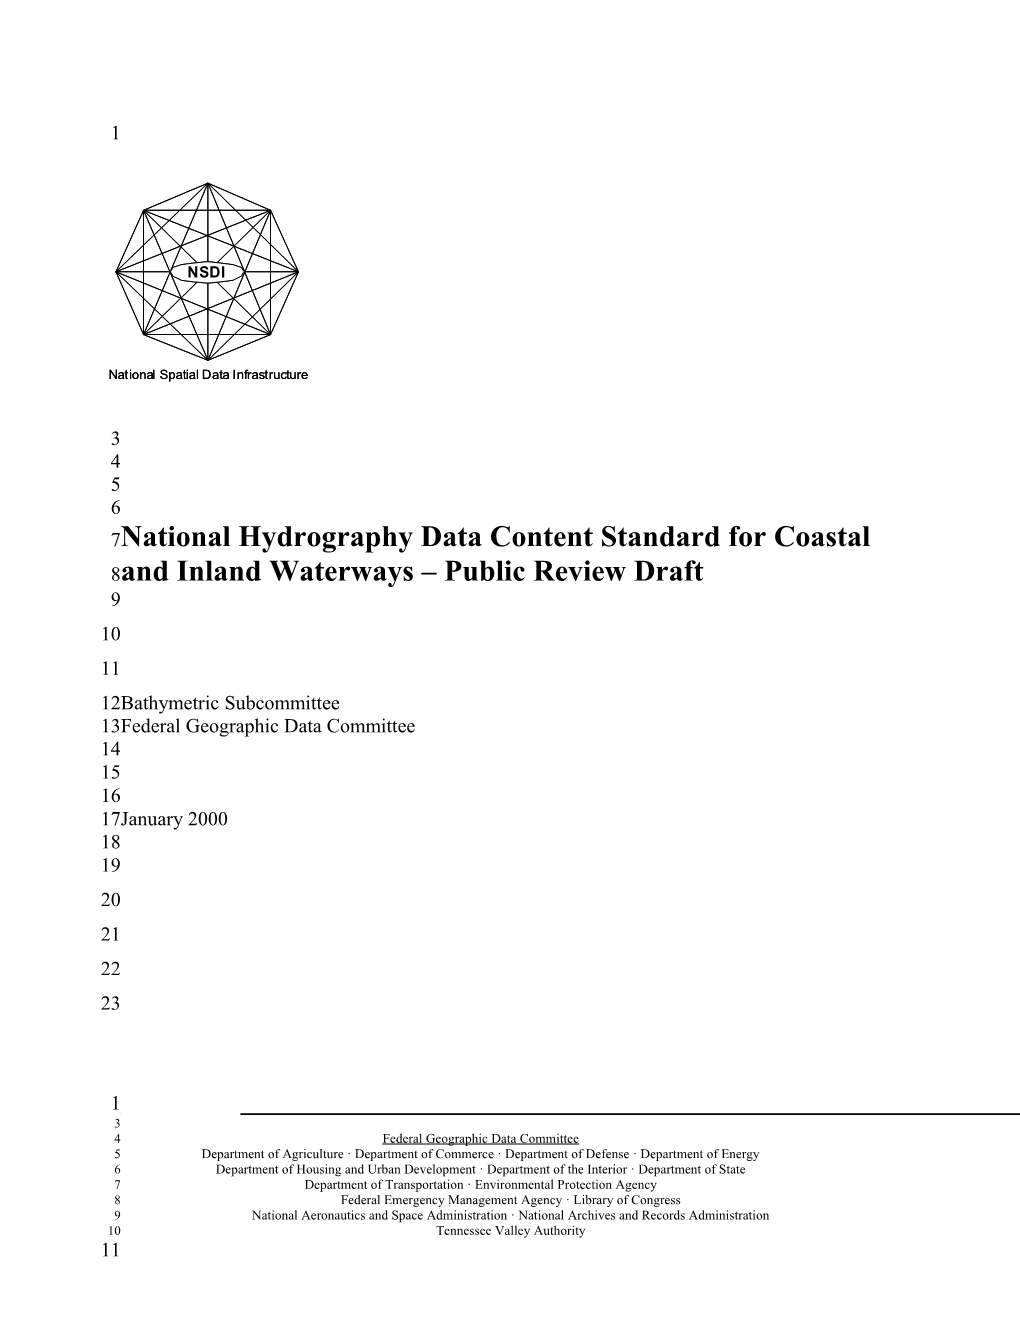 National Hydrography Data Content Standard for Coastal and Inland Waterways Public Review